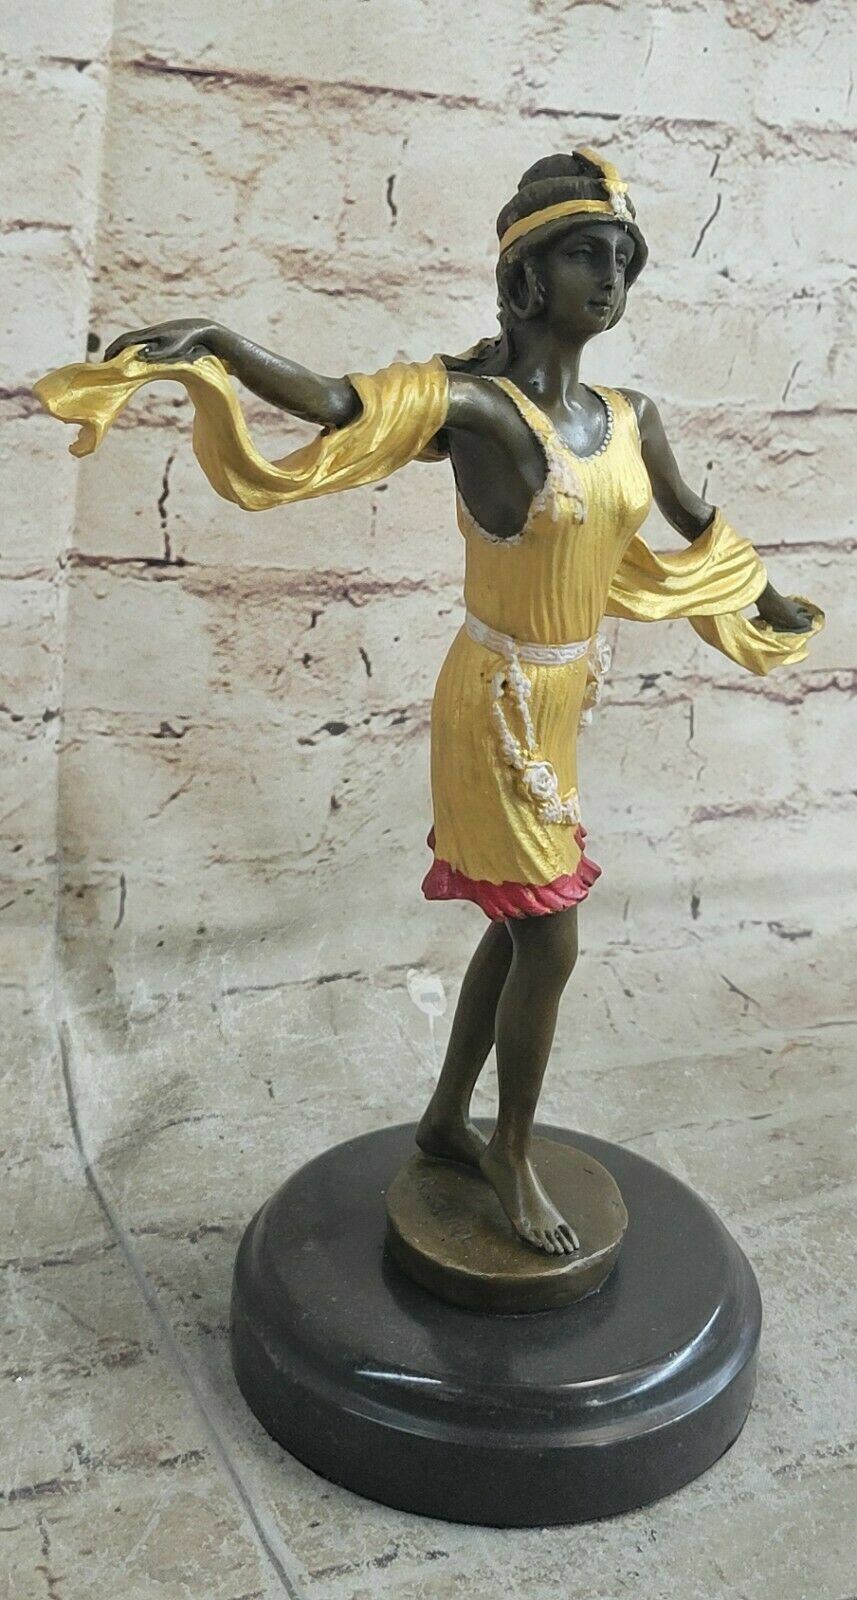 French Moulin Rouge Dancer Bronze Statue By Mirval Art Sculpture Figurine Sale